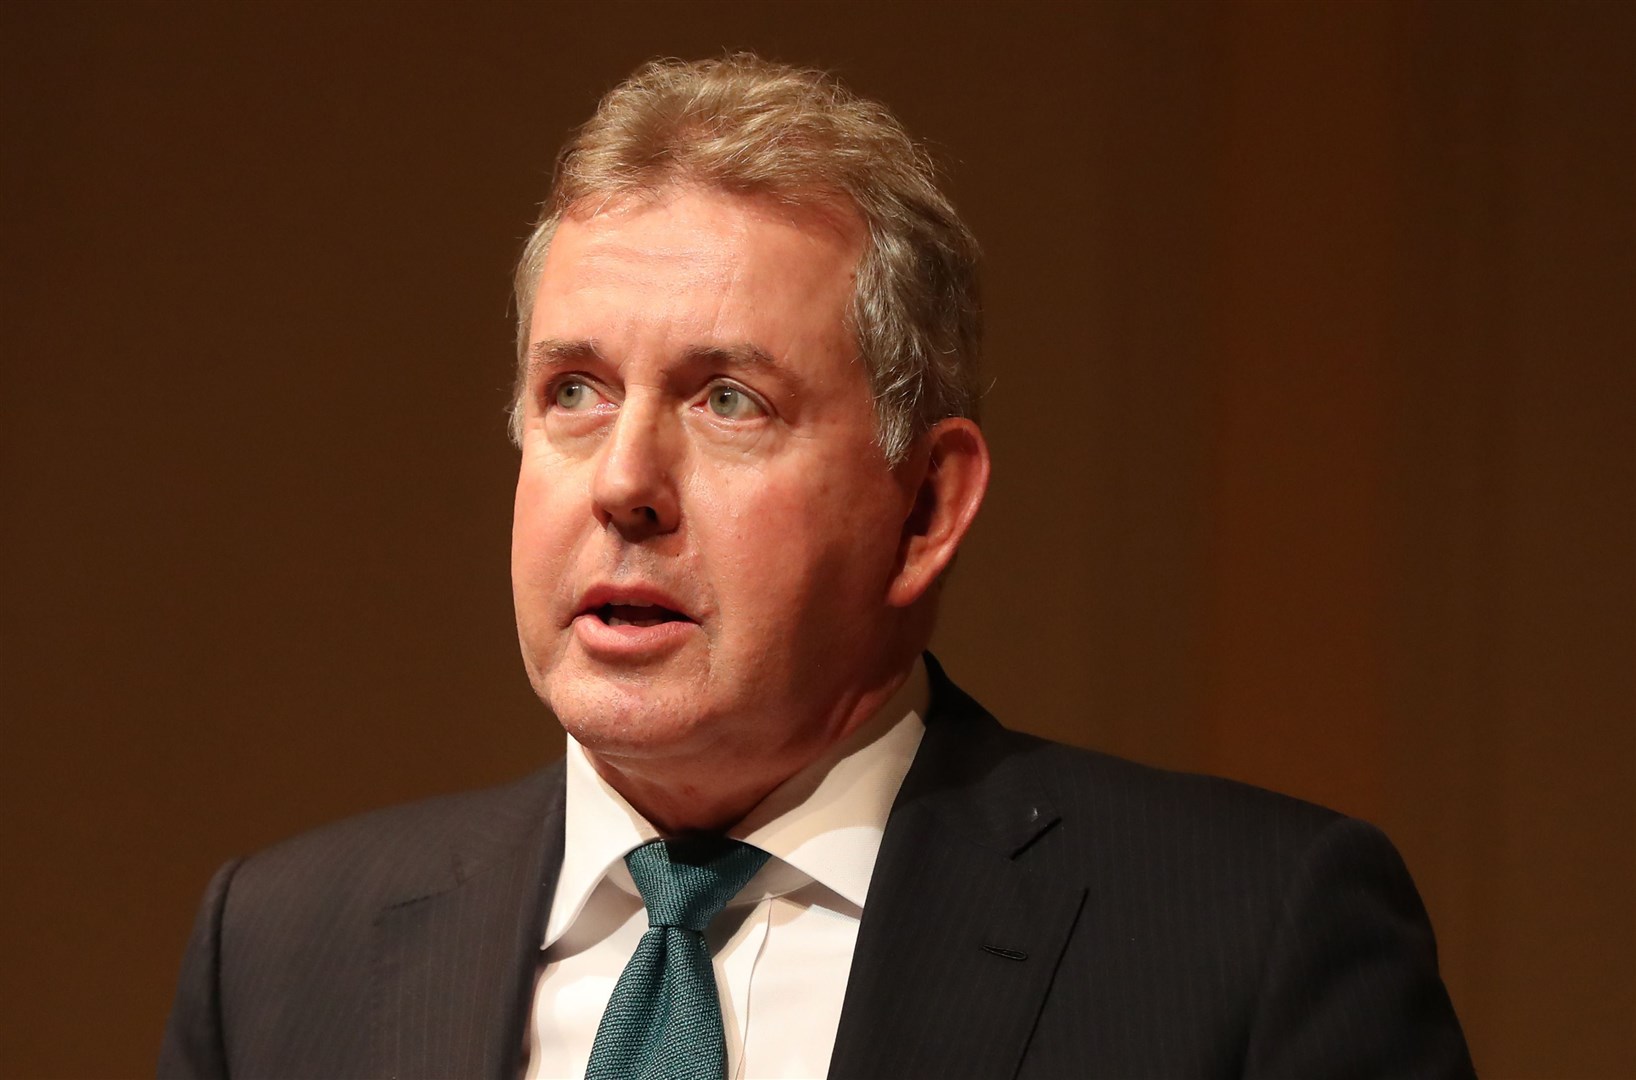 Lord Kim Darroch said people could “sleep easy in their beds” (Niall Carson/PA)